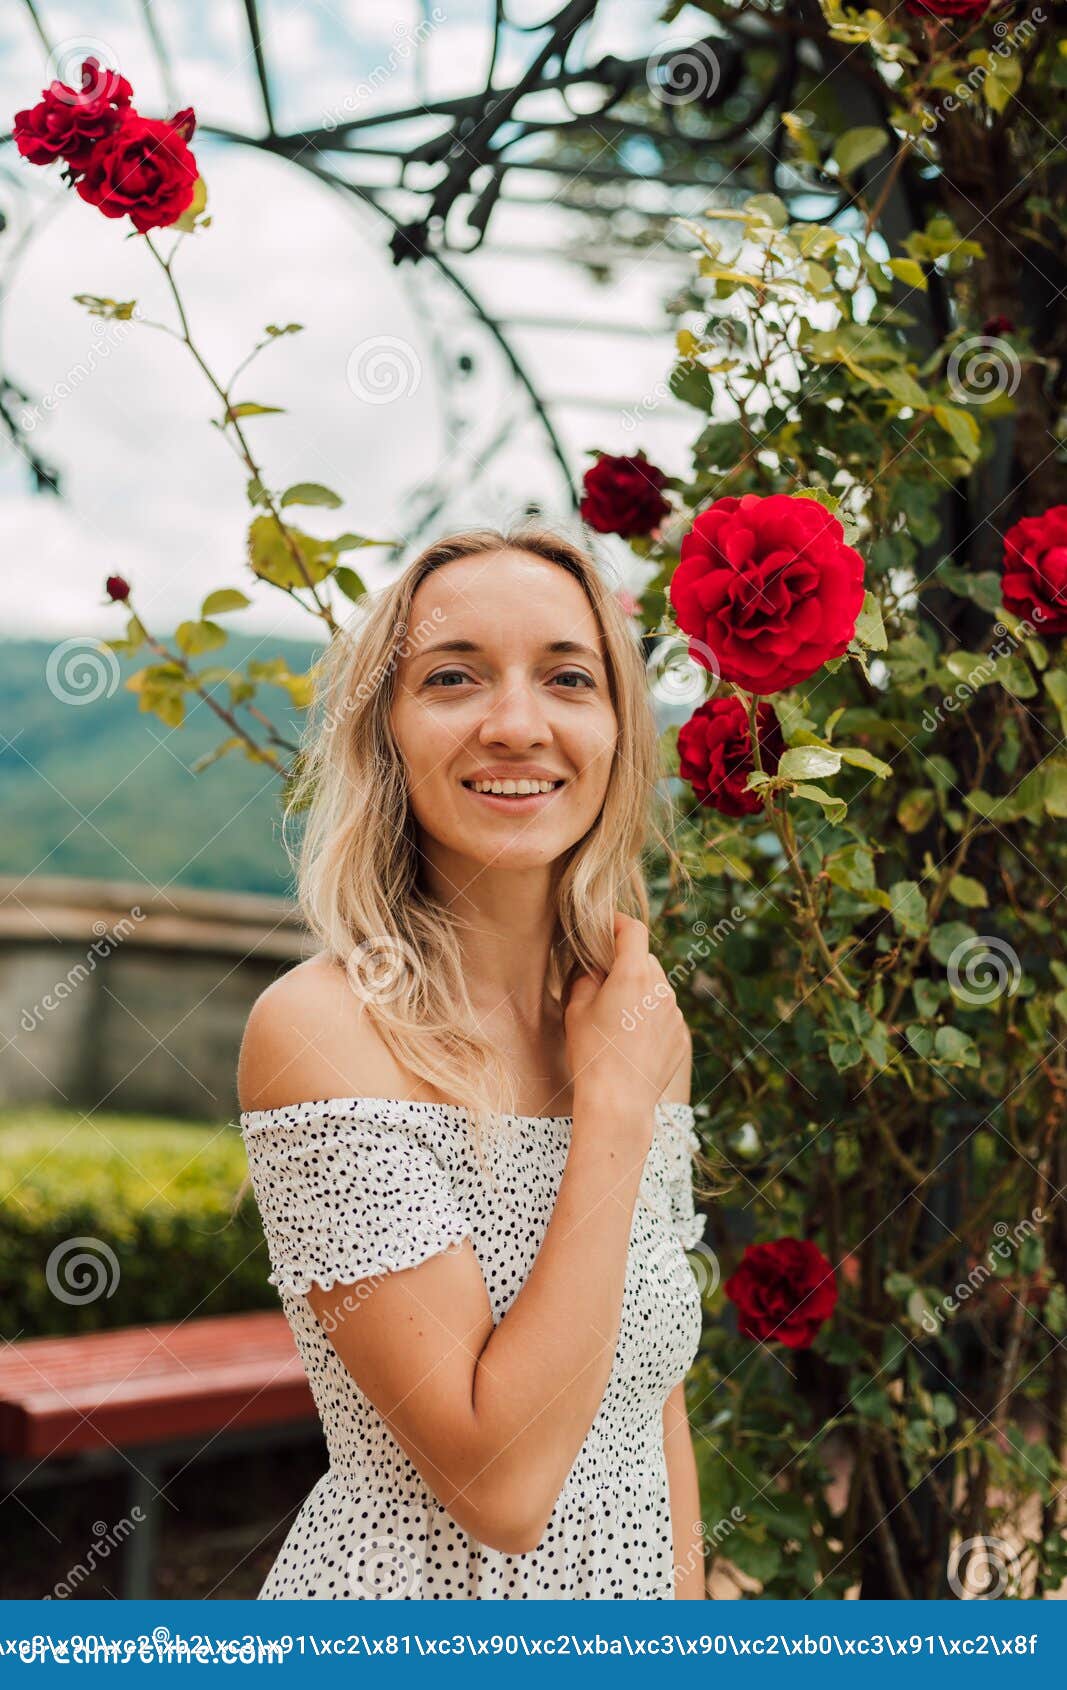 A Beautiful Woman Stands Near A Bush Of Red Roses And Smiles Stock